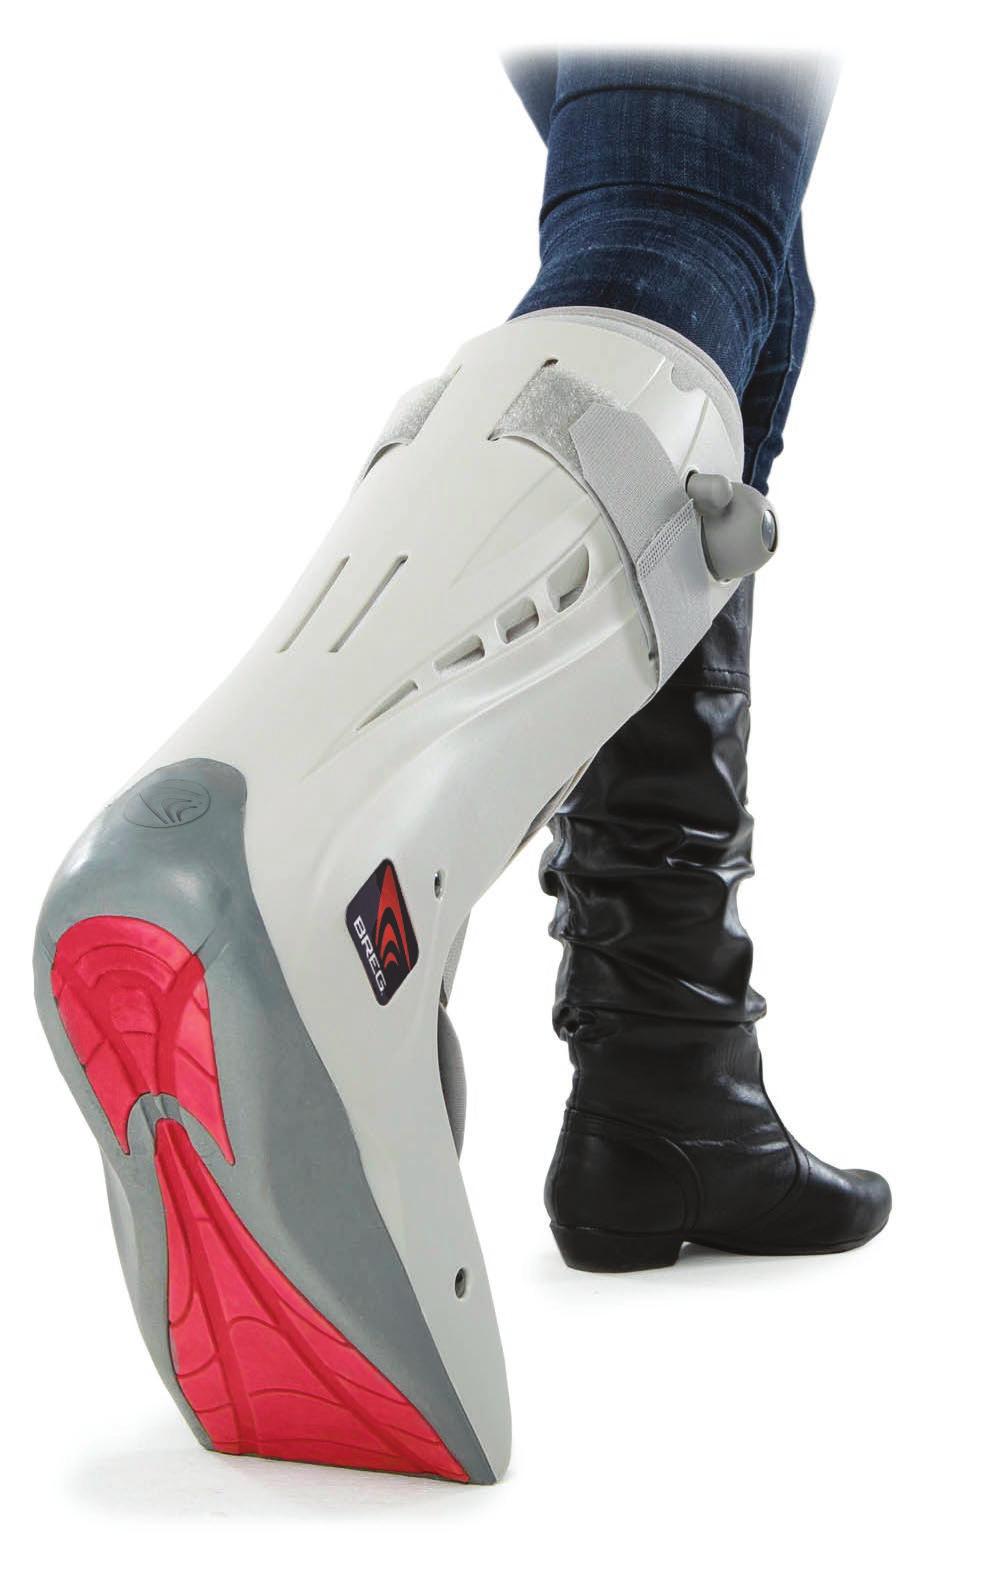 Walk Normally While Recovering The Genesis Walker s streamlined design provides a low profile look and feel.